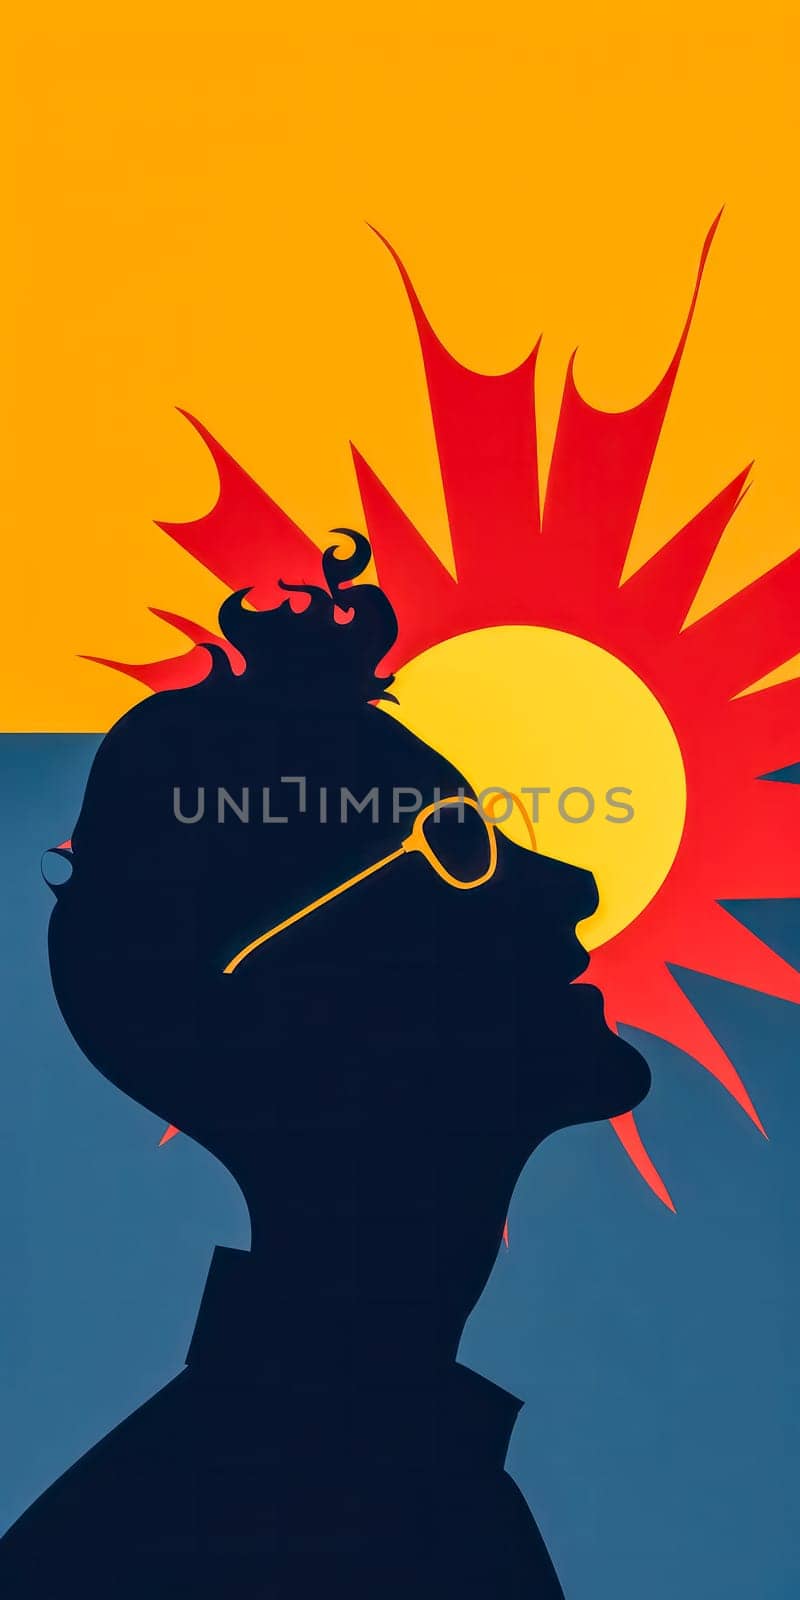 stylized silhouette of a person with an afro and sunglasses against a vibrant yellow and blue background, with a fiery sun motif integrated into the design, suitable for a dynamic and bold banner text by Edophoto